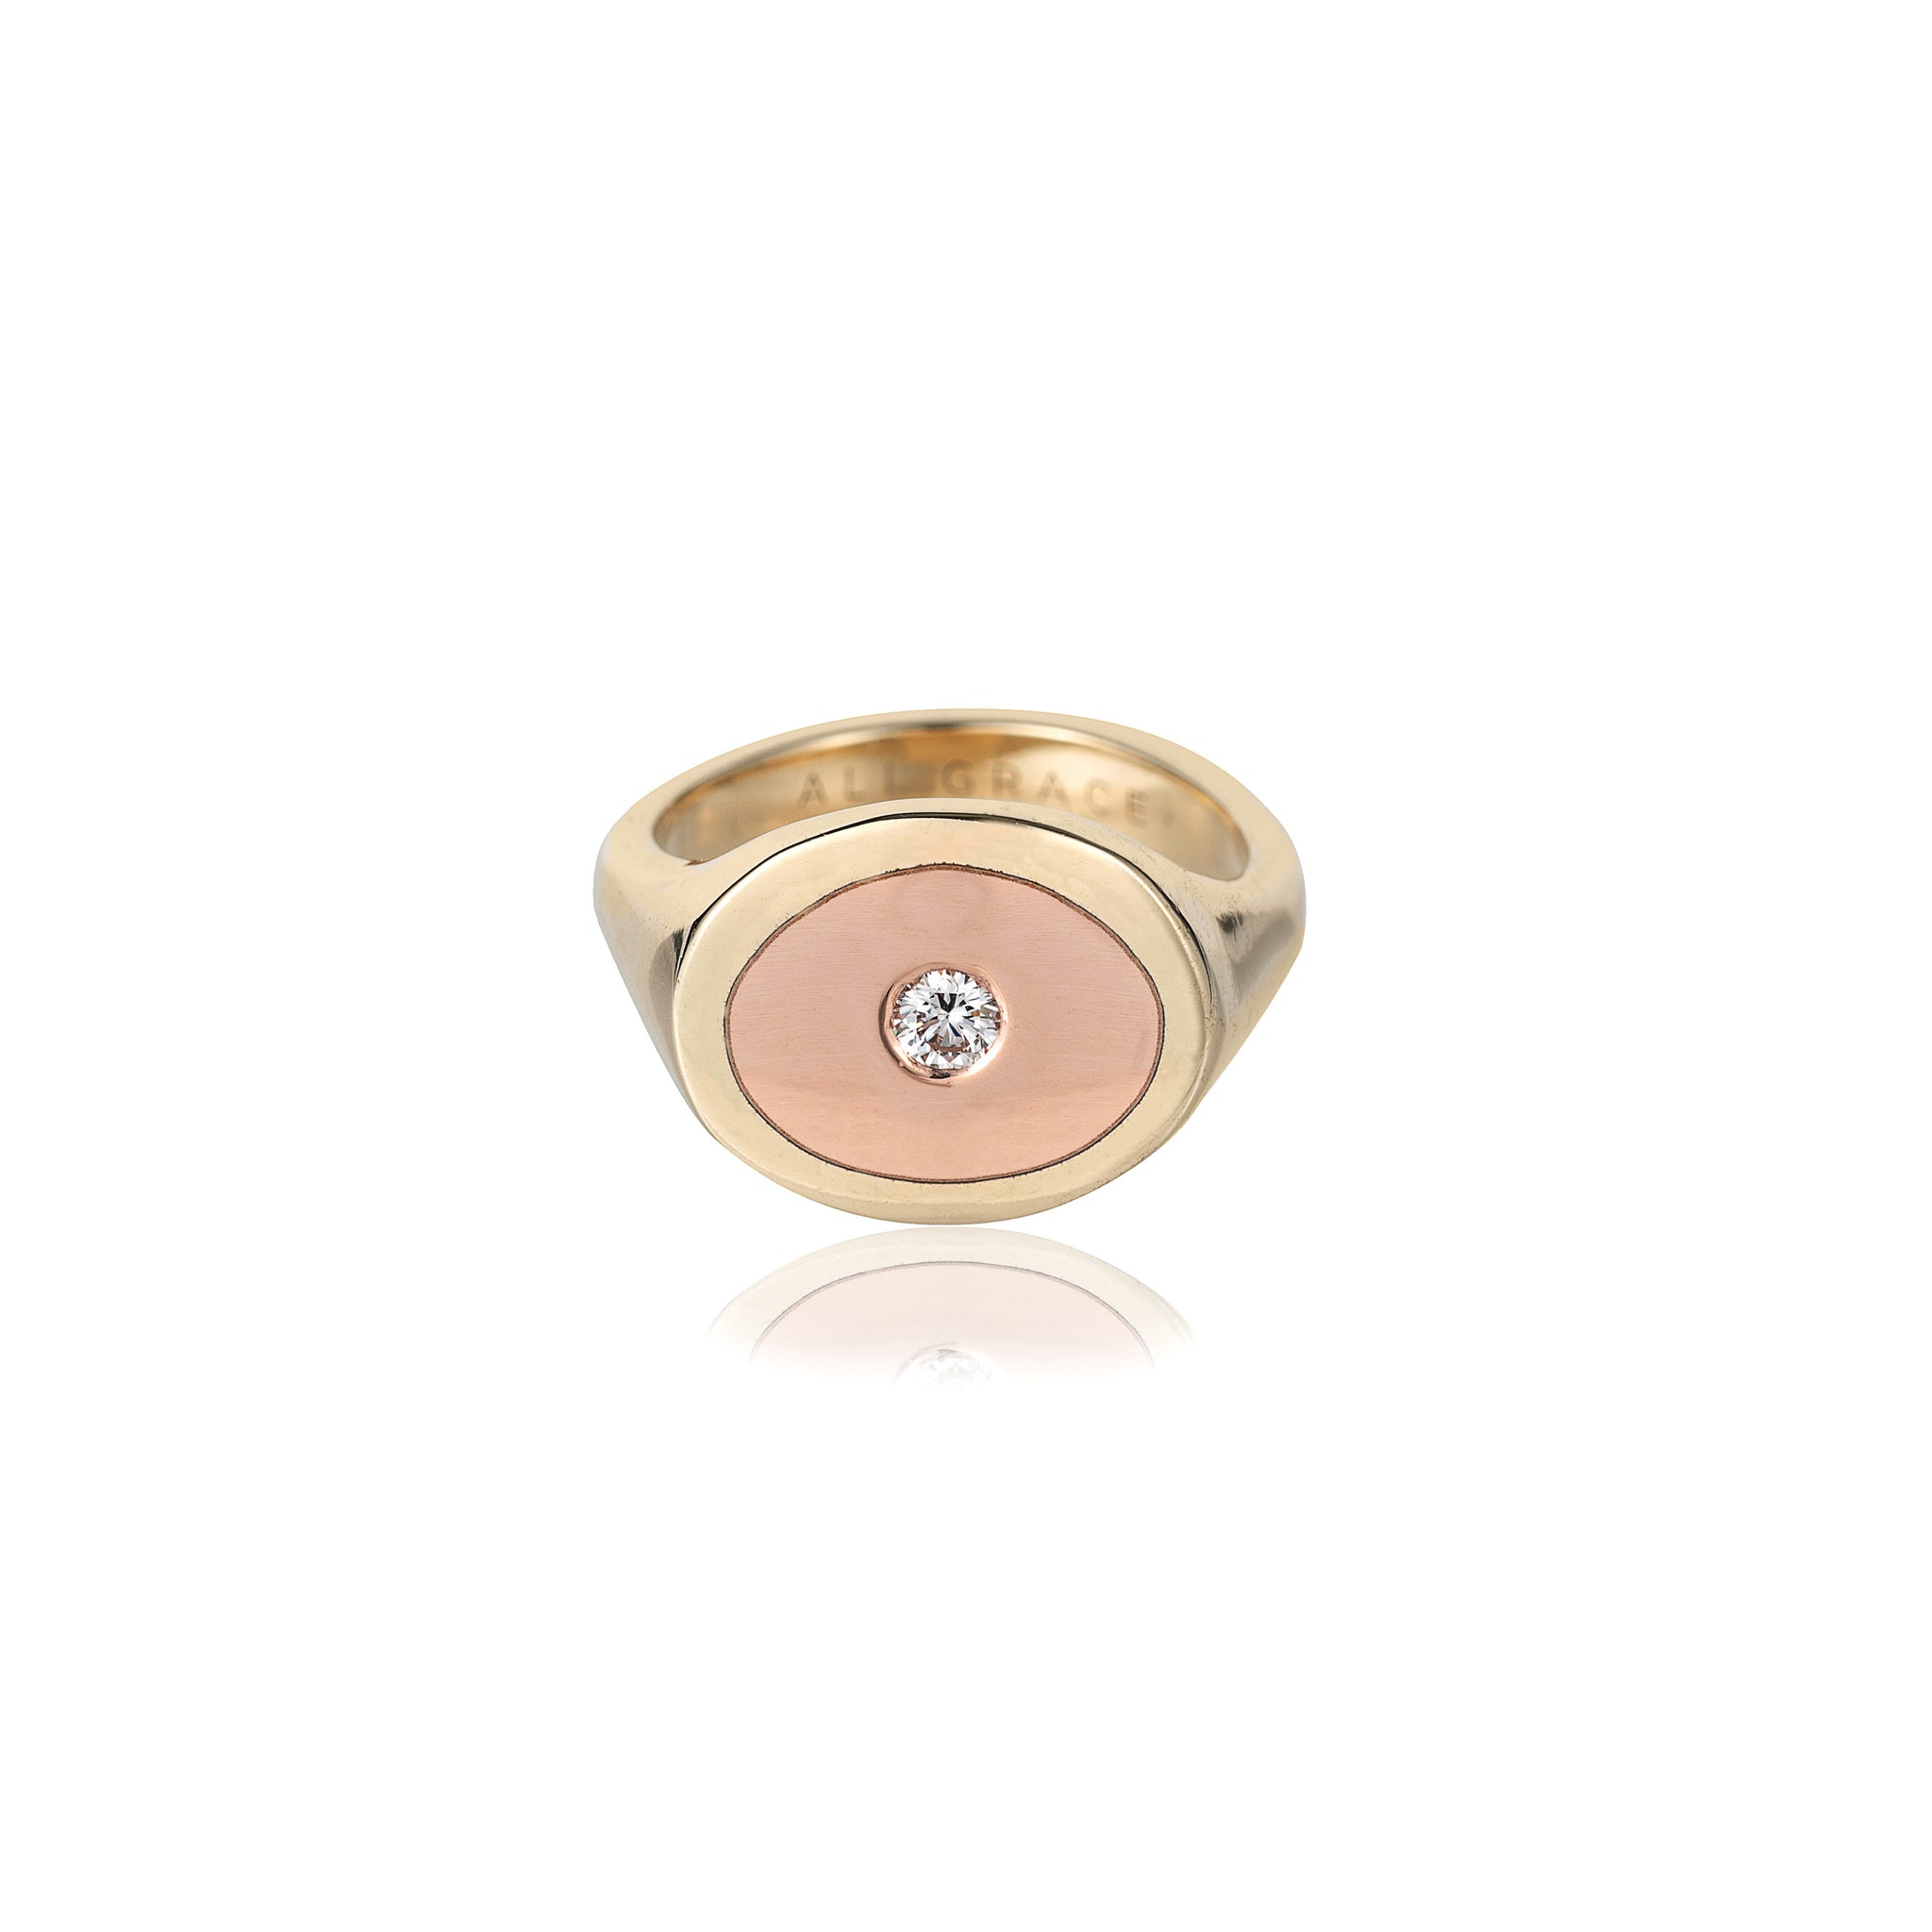 ali grace jewelry ali grace hair beauty sustainable jewelry ethical fashion rose gold signet ring diamond ring pinky ring family heirloom